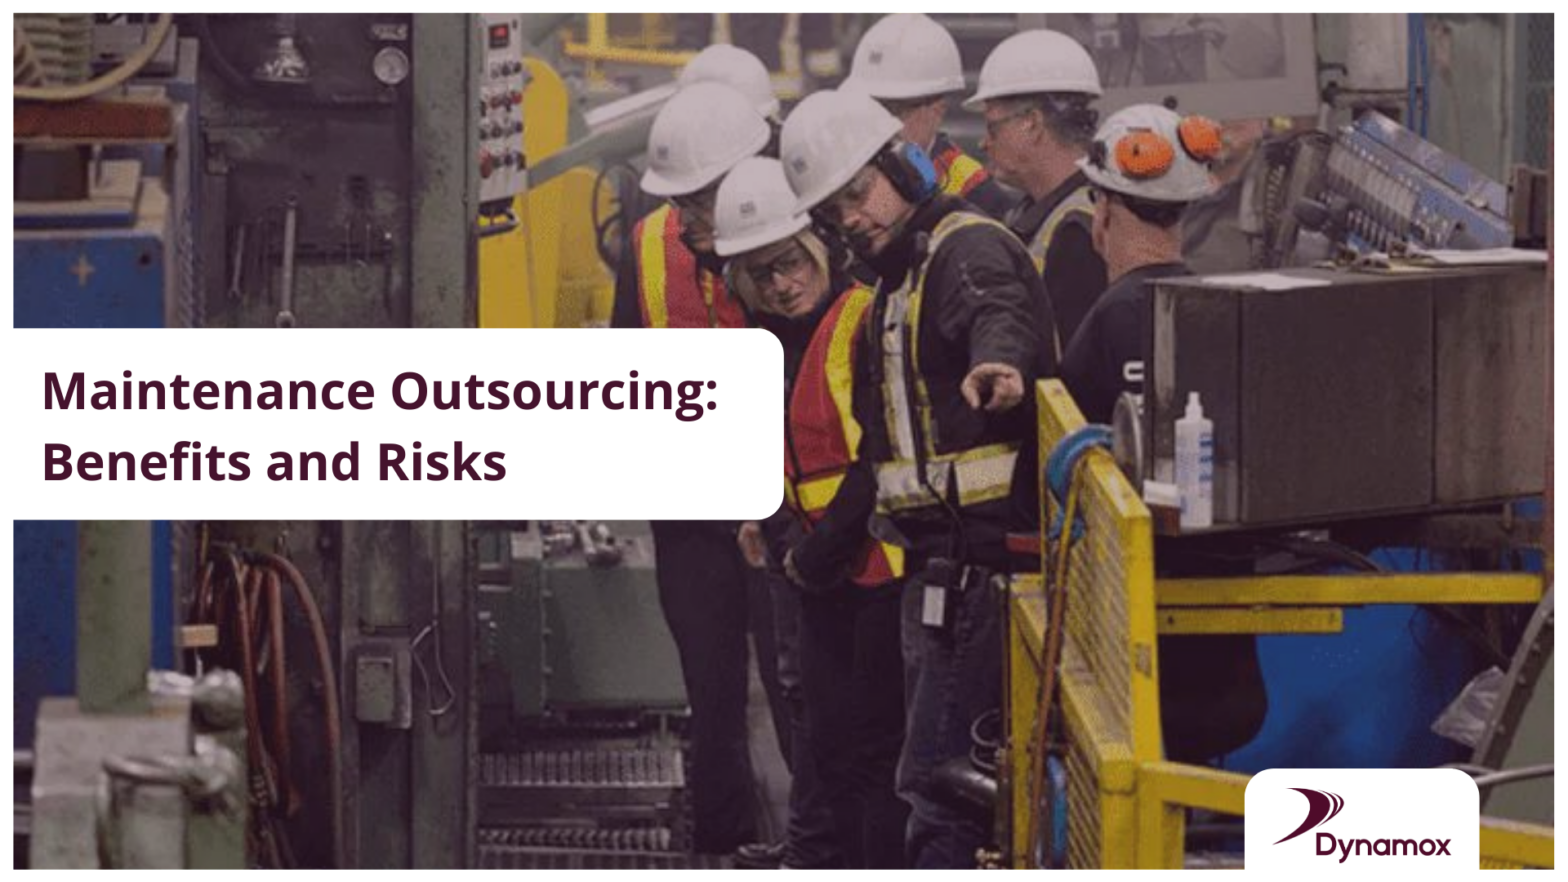 Maintenance Outsourcing: Benefits and Risks